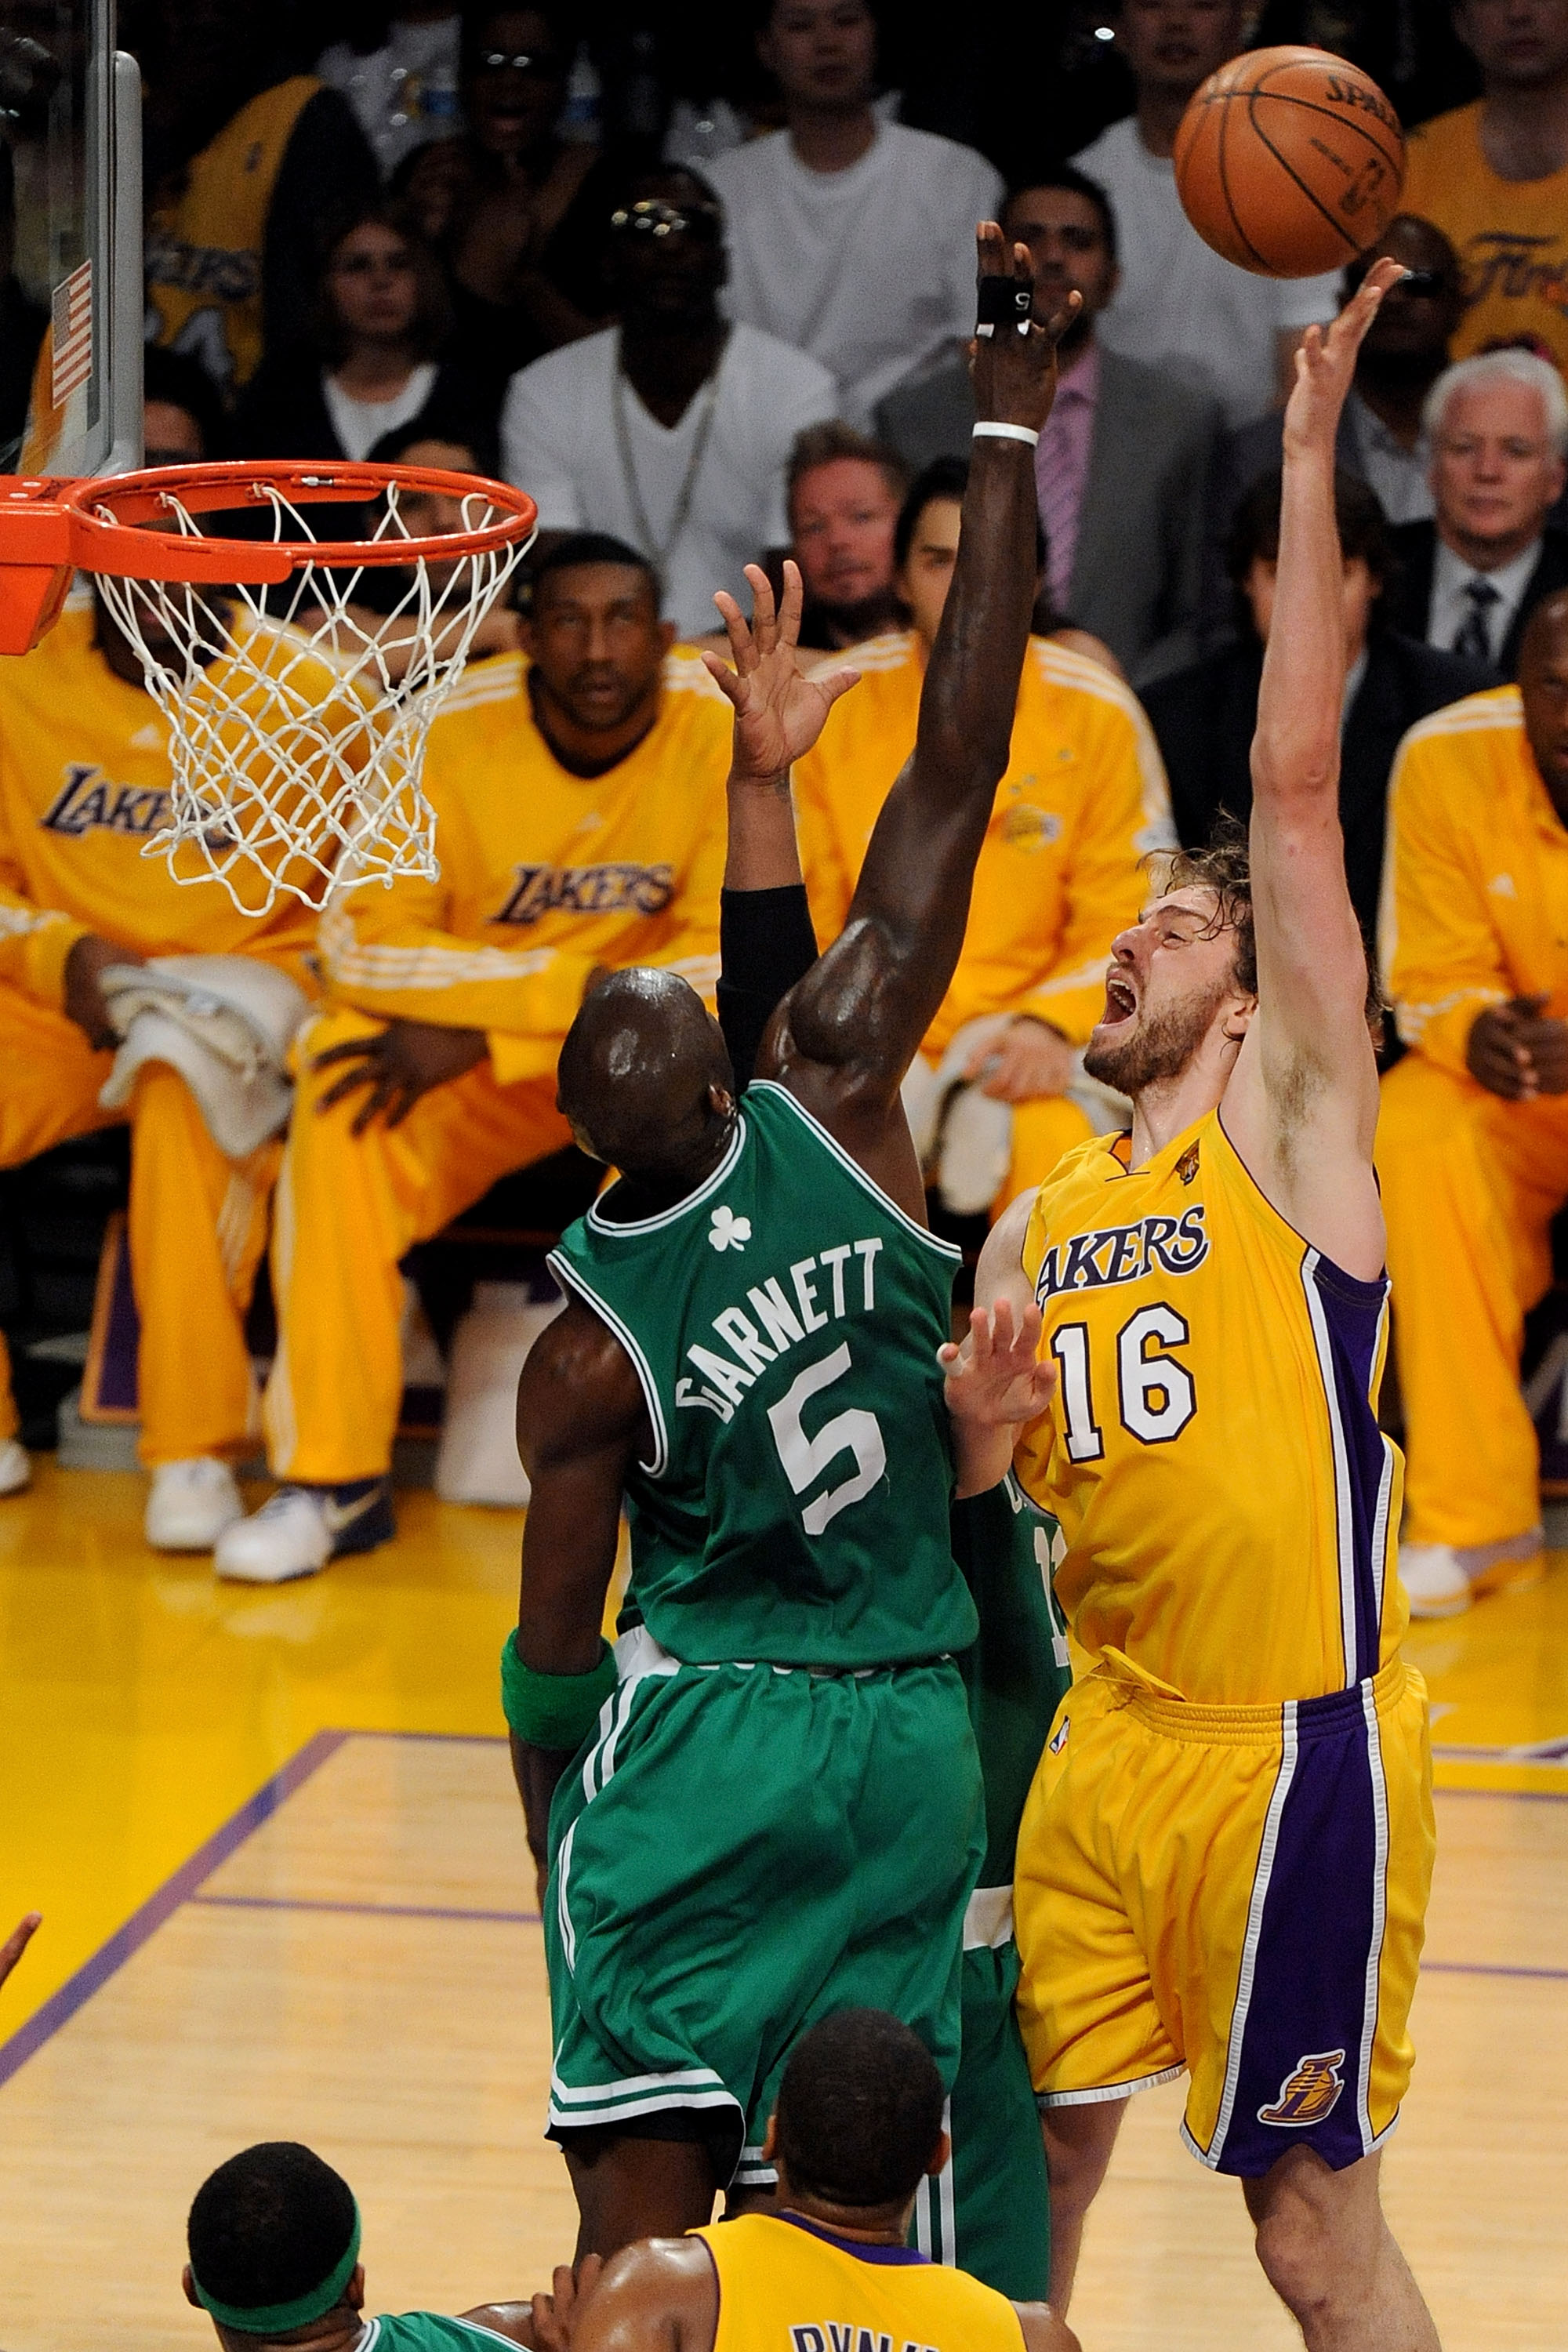 LOS ANGELES, CA - JUNE 17:  Pau Gasol #16 of the Los Angeles Lakers up for a shot over Kevin Garnett #5 of the Boston Celtics in Game Seven of the 2010 NBA Finals at Staples Center on June 17, 2010 in Los Angeles, California.  NOTE TO USER: User expressly